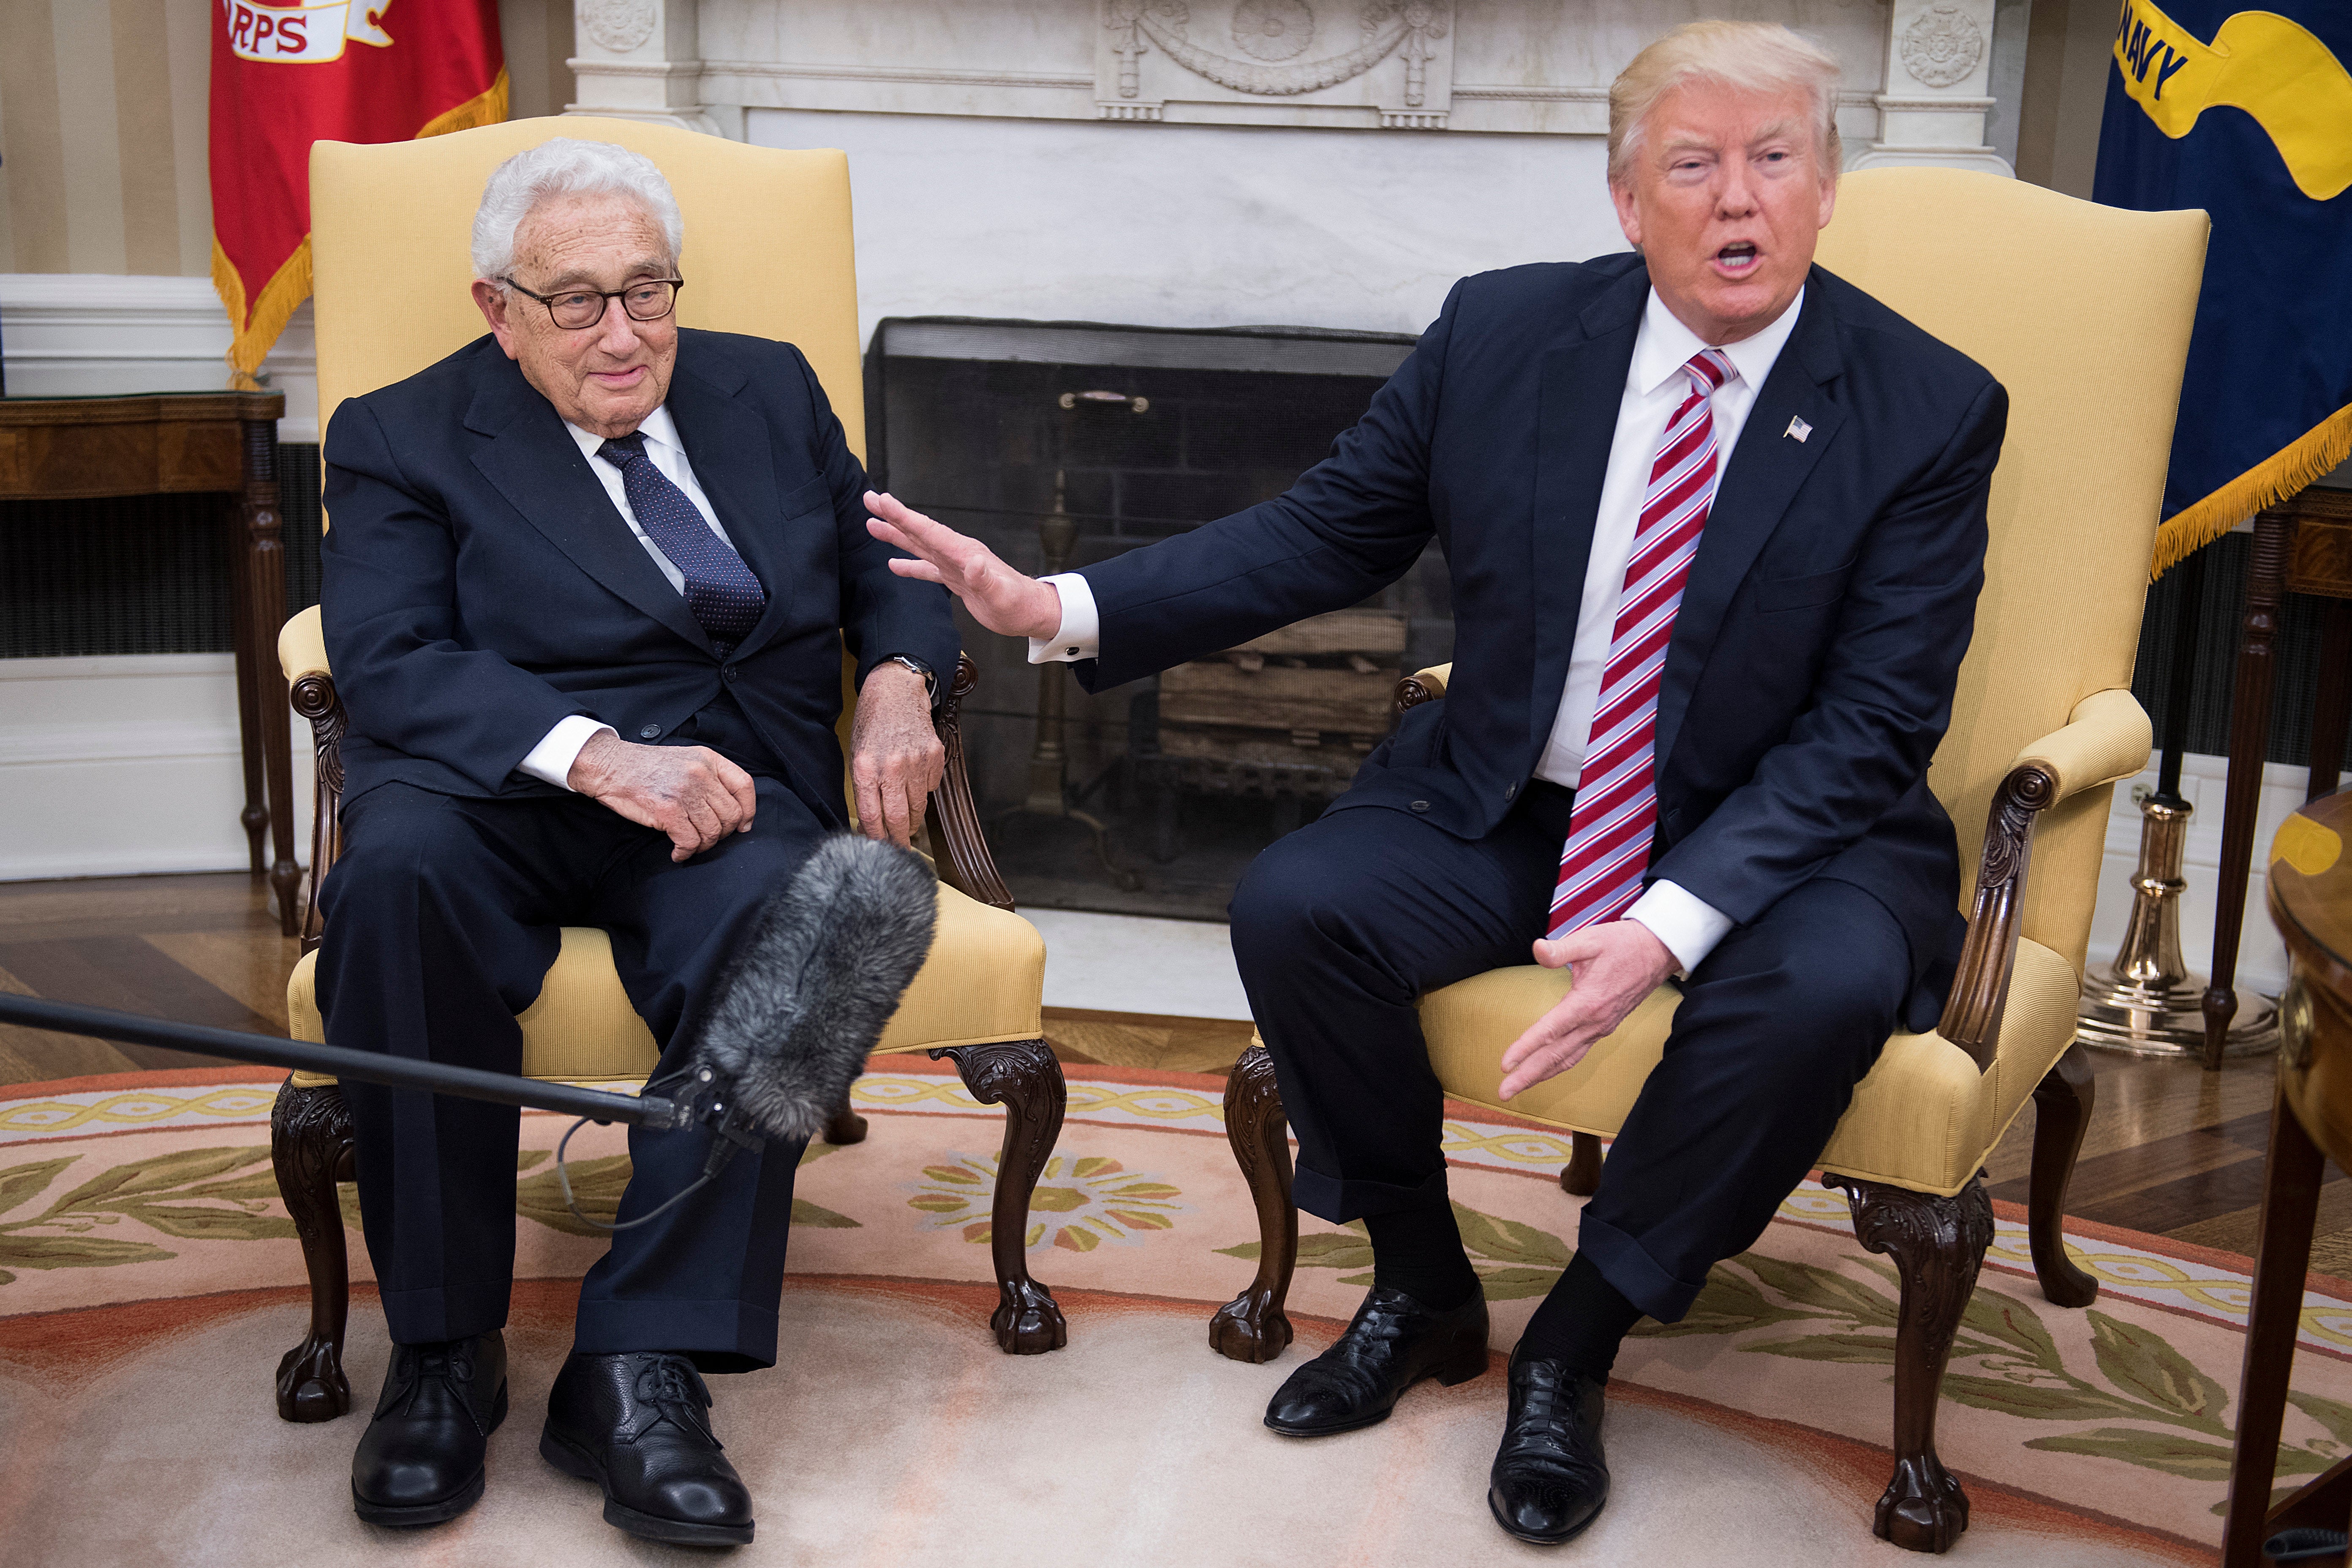 FILES) US President Donald Trump (R) speaks with former US Secretary of State Henry Kissinger during a meeting in the Oval Office in 2017.